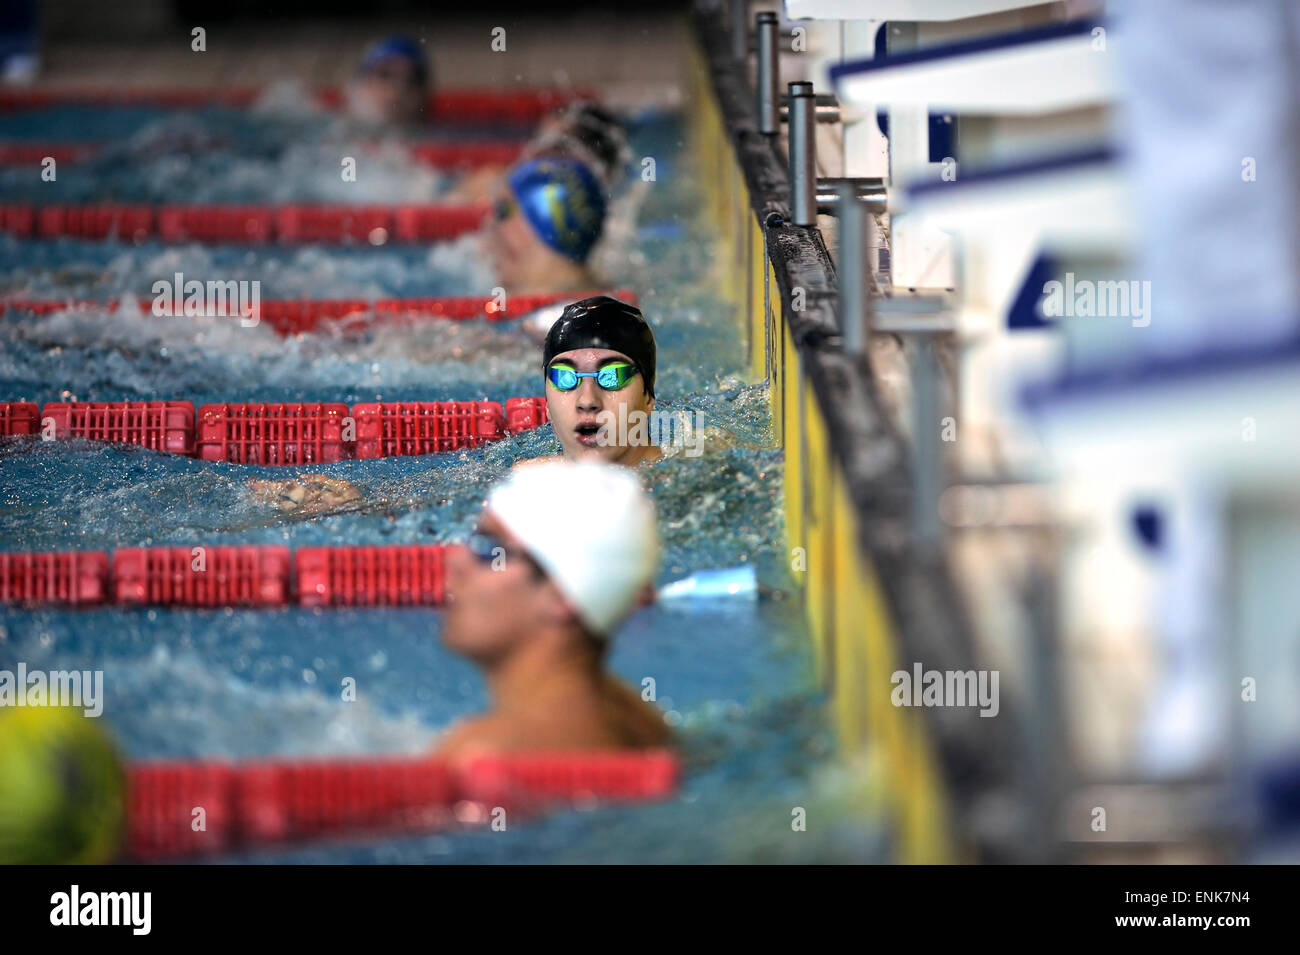 Swimmer looking at camera after a swimming race Stock Photo